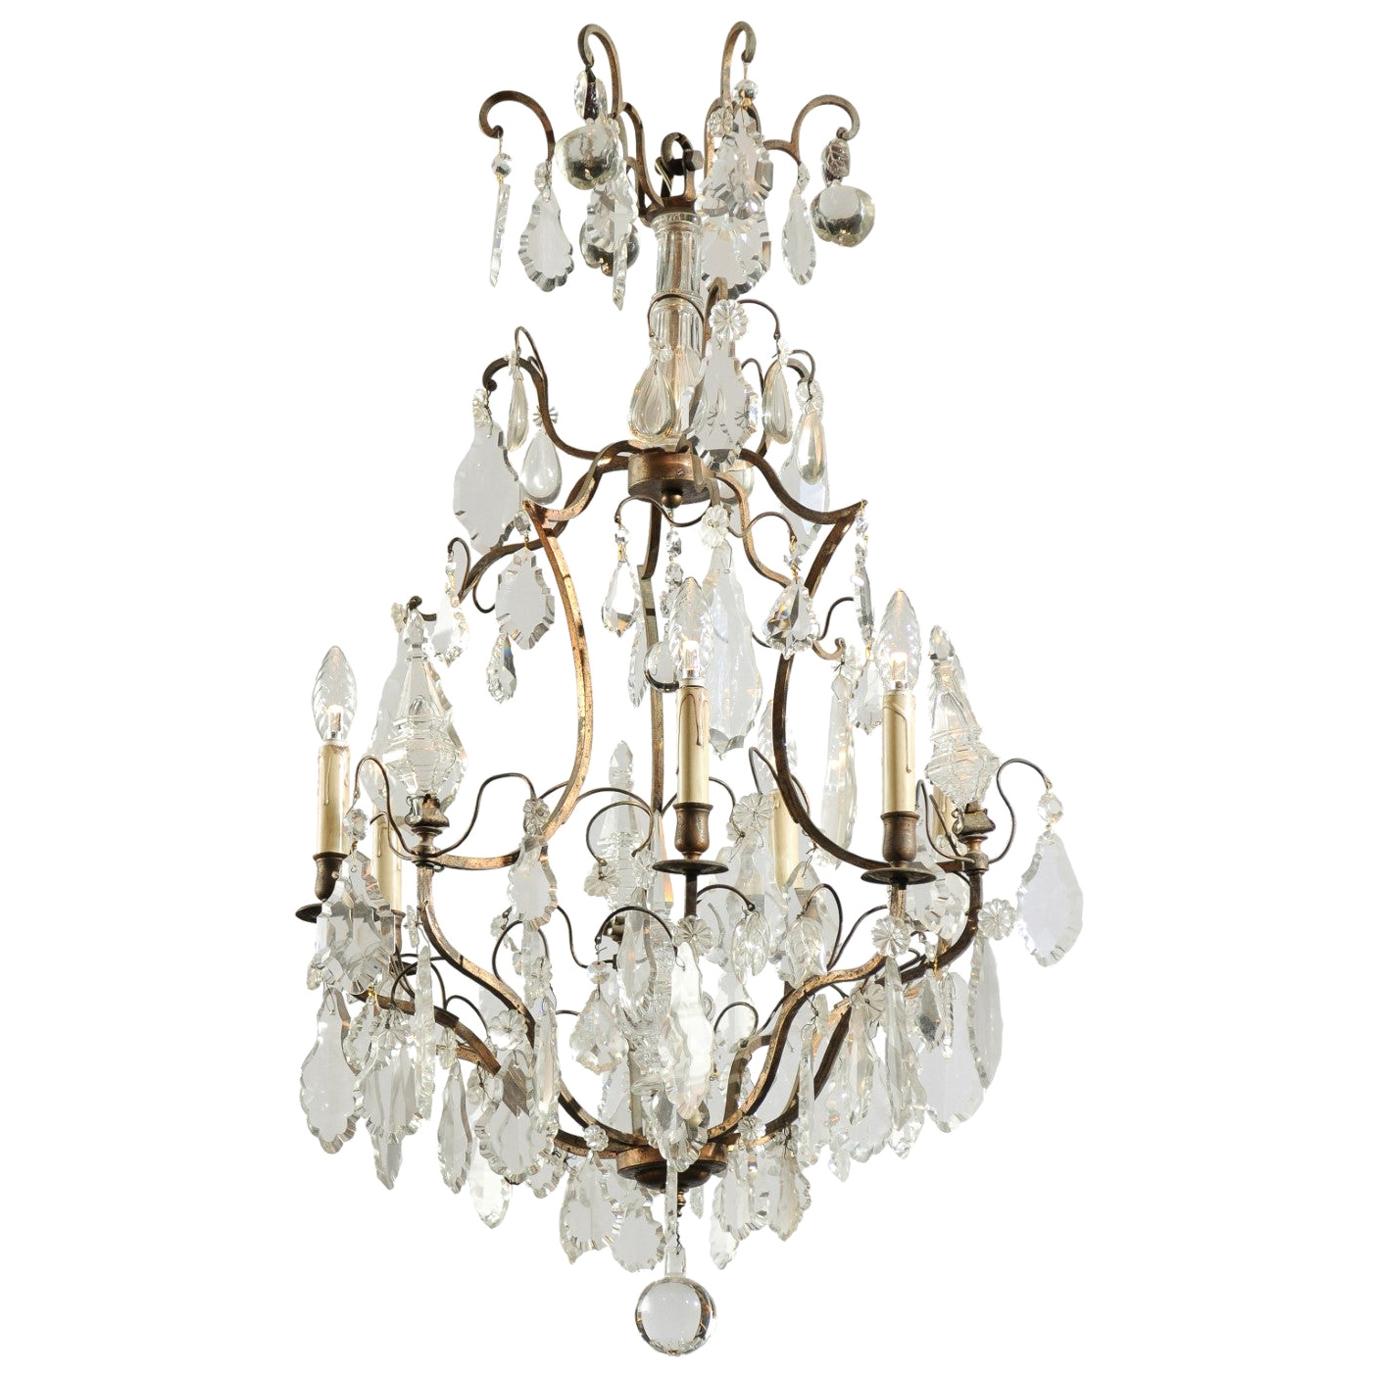 French Six-Light Crystal and Iron Chandelier with Obelisks, Late 19th Century